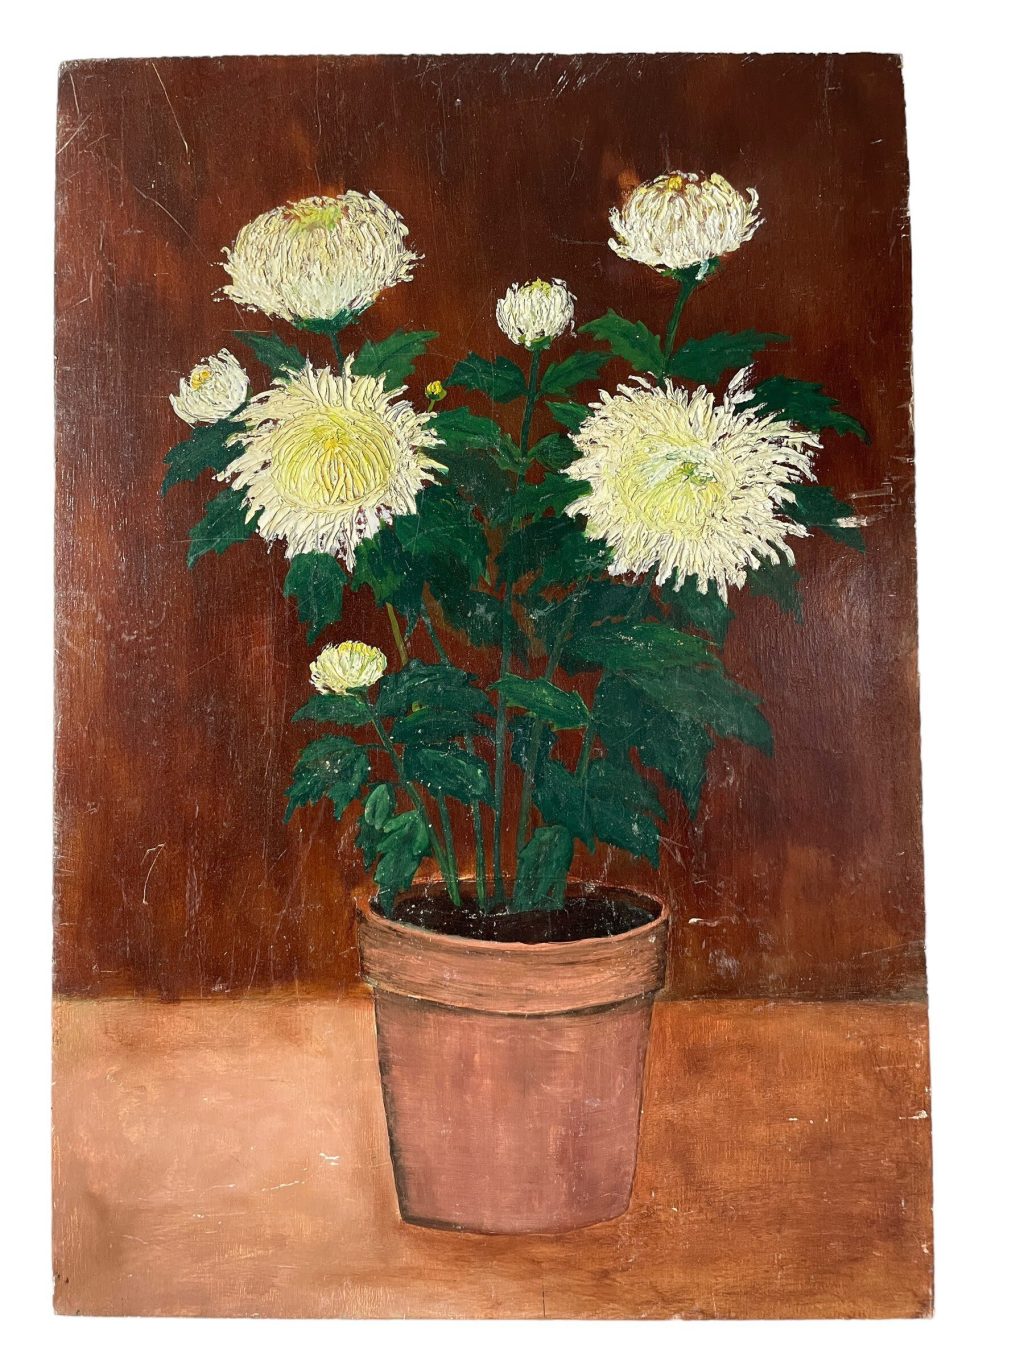 Vintage French Still Life White Flowers In Flower Pot On Wood Board Painting Acrylic c1970’s